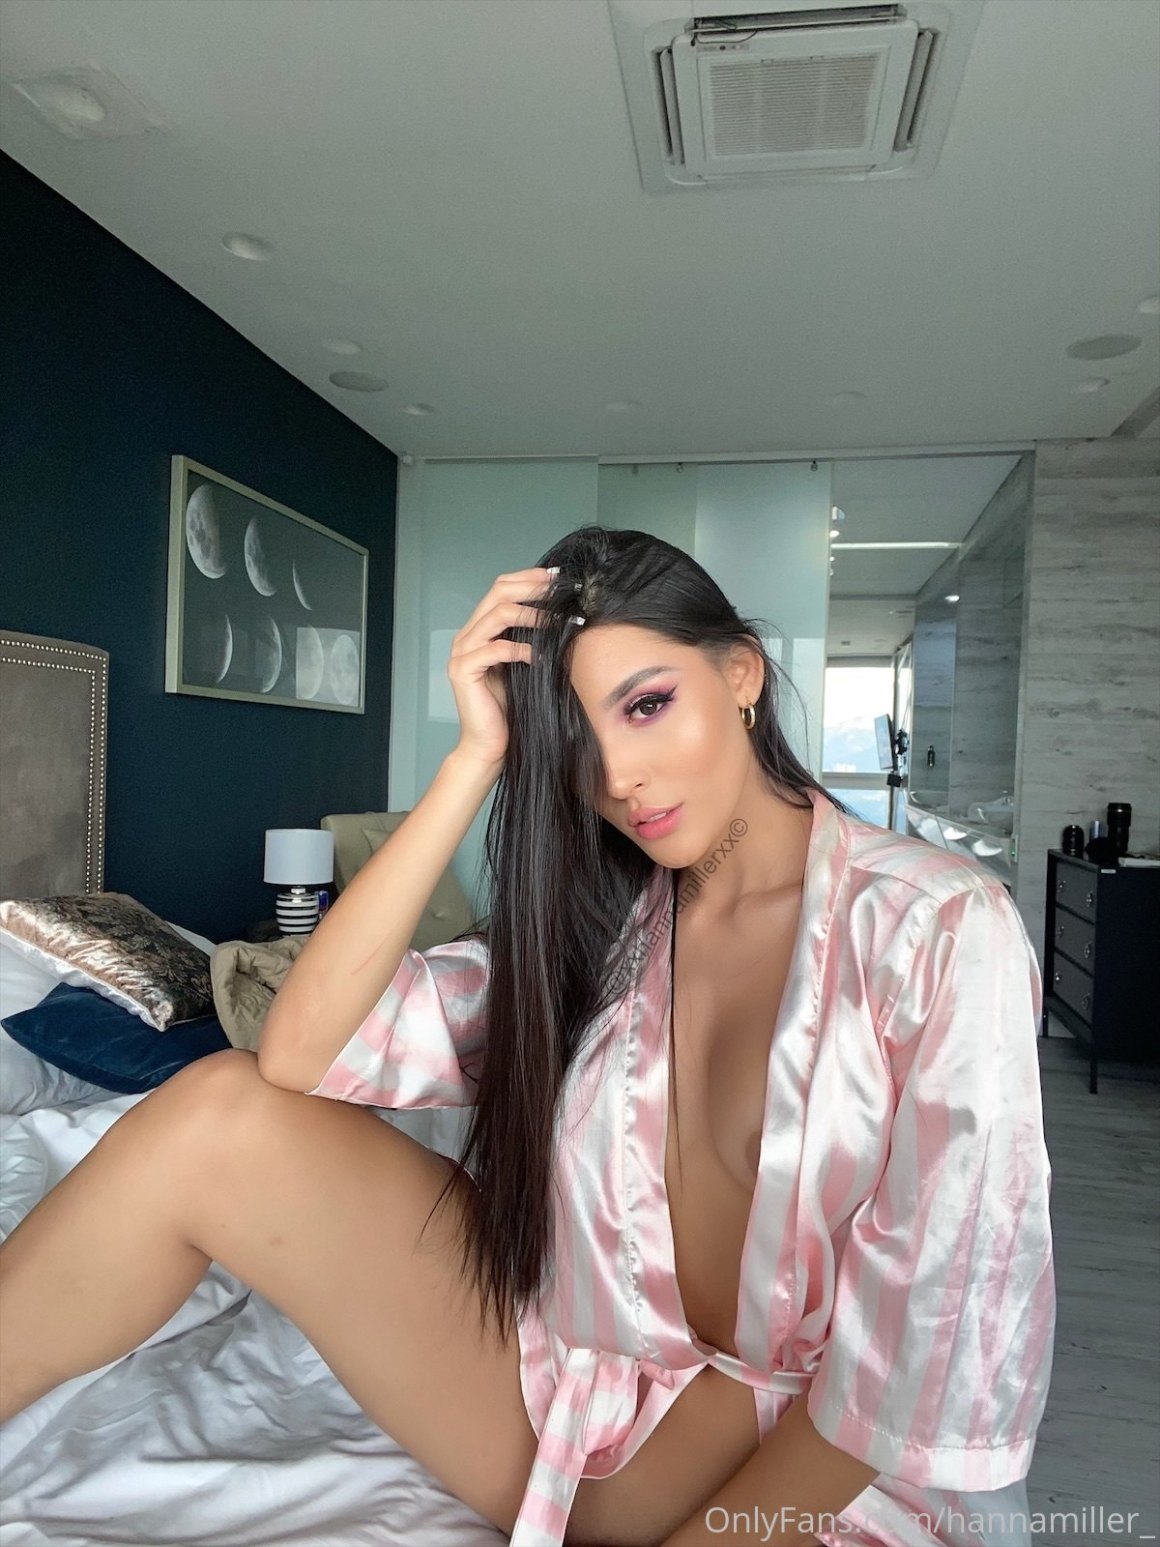 AsianOnlyfans 079 306 20201127